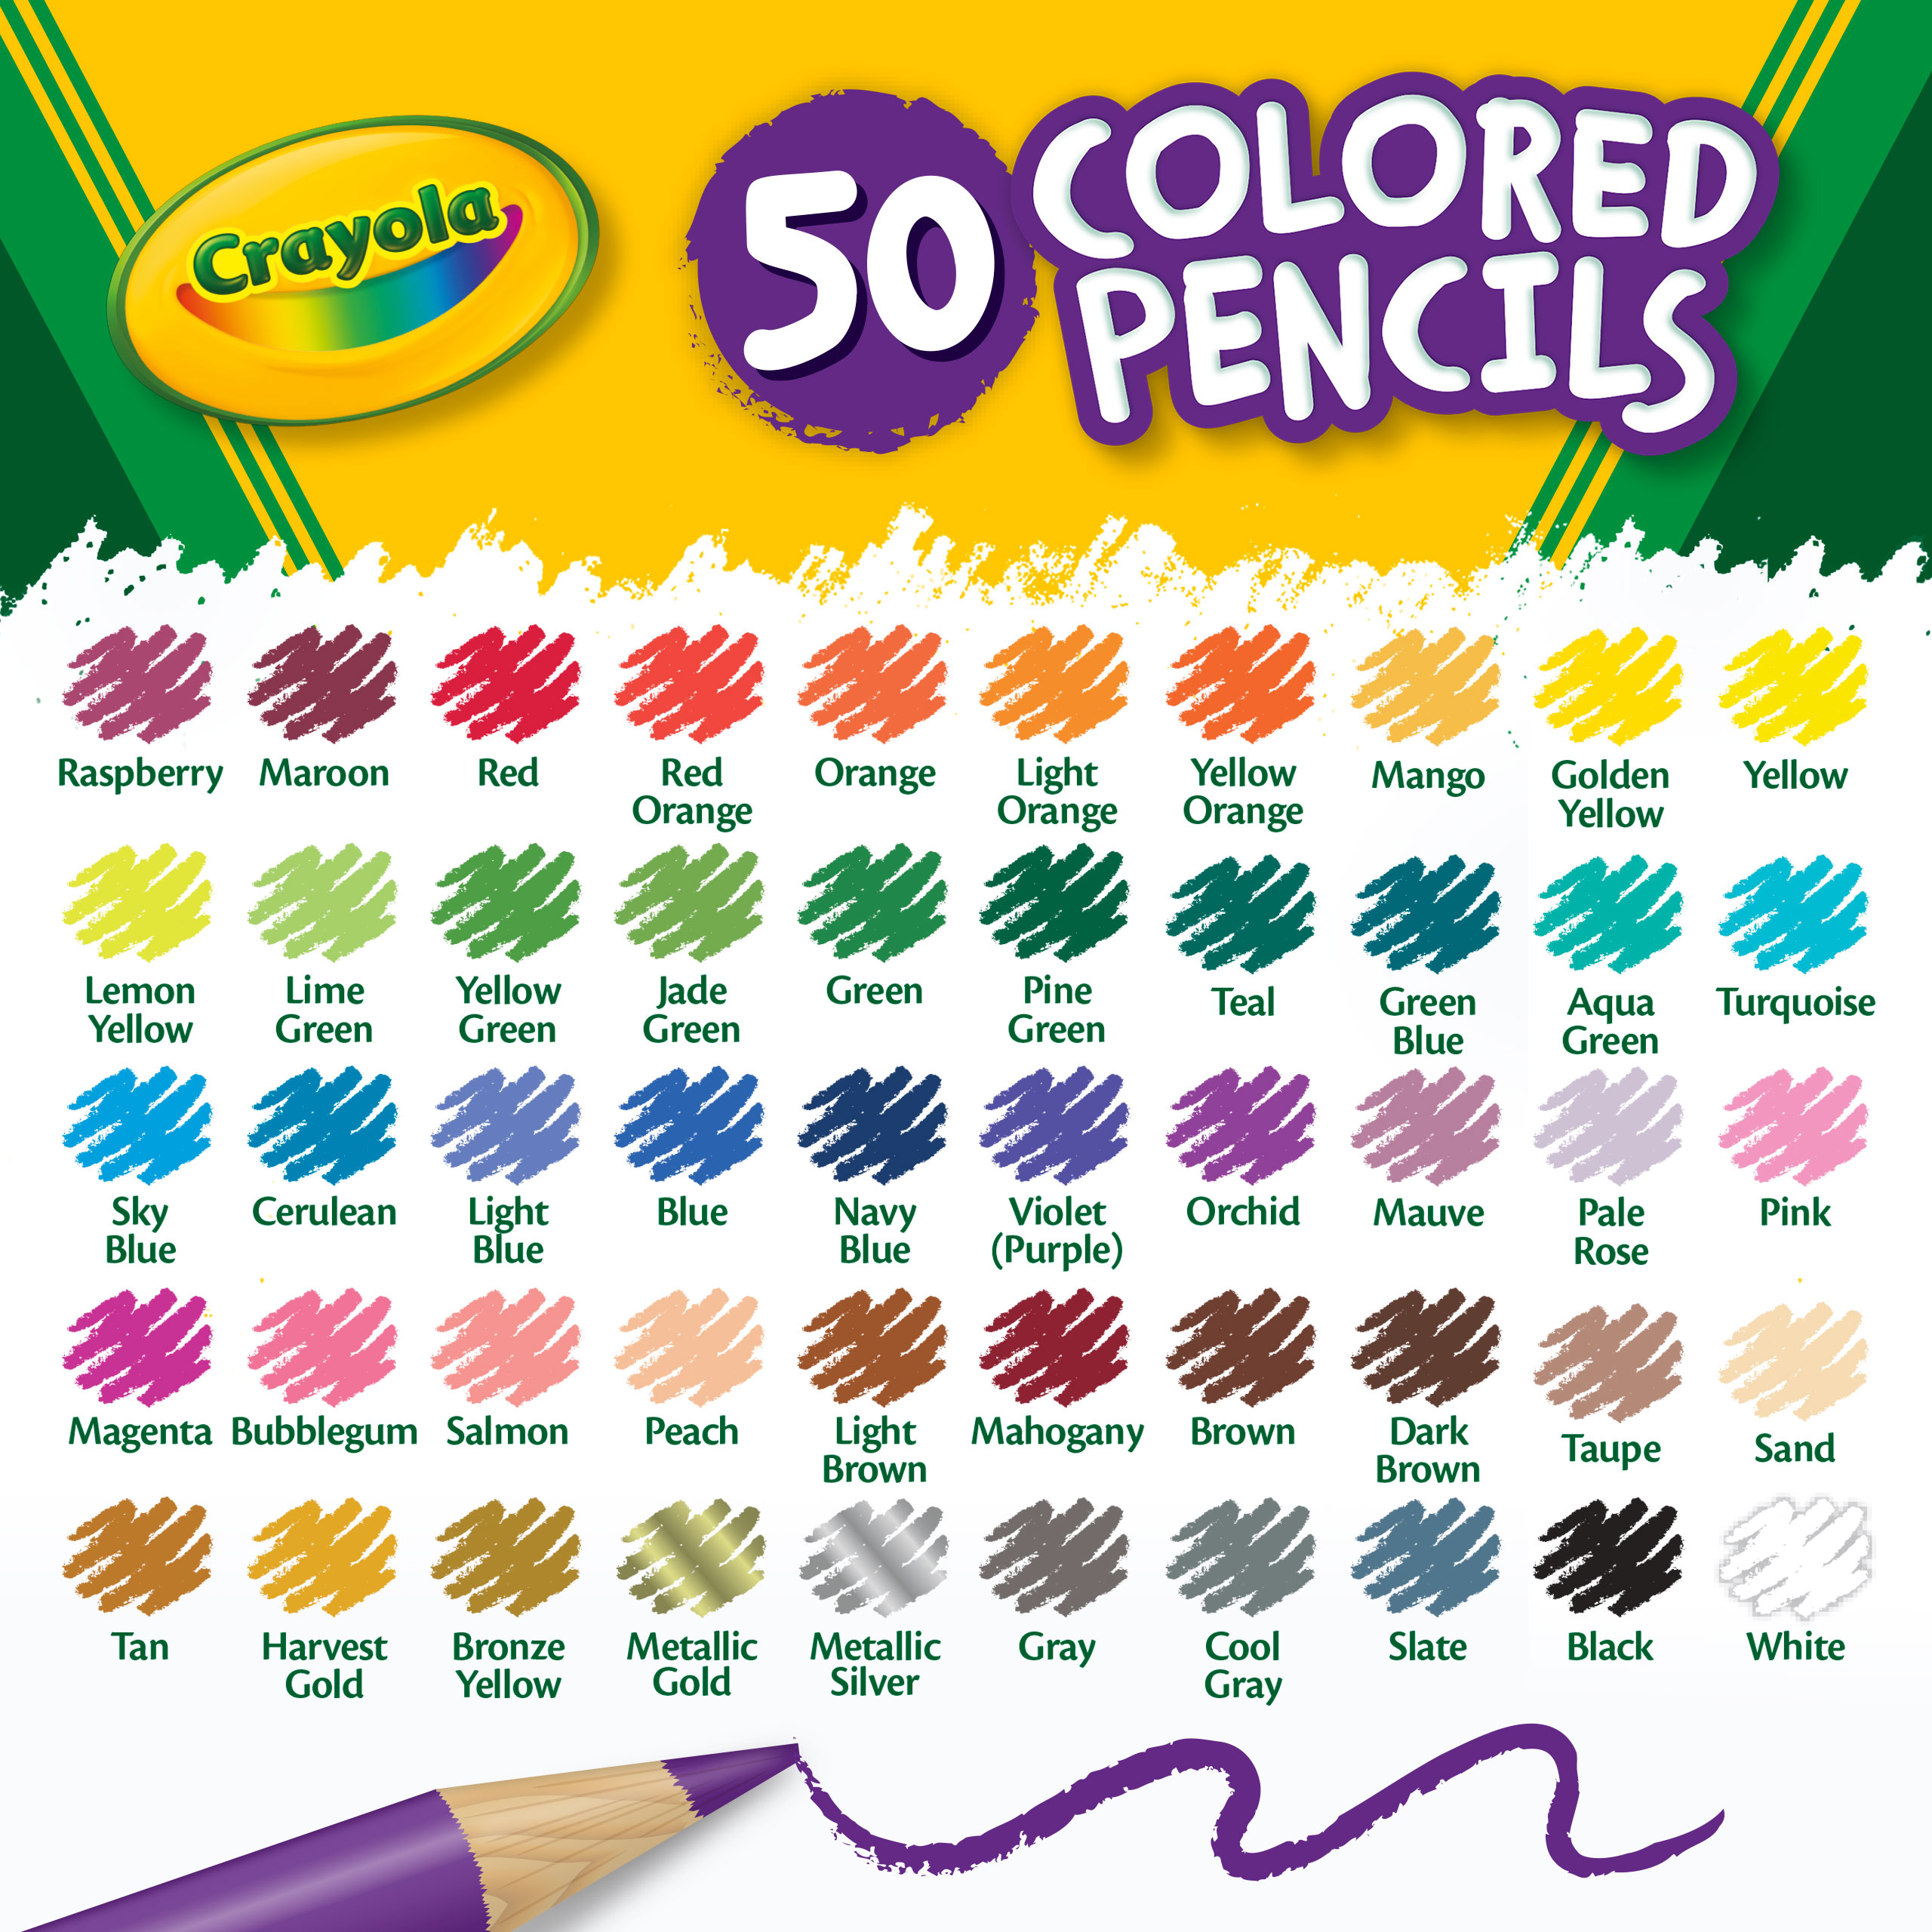 Crayola Colored Pencil Set, 50 Ct, Back to School Supplies for Teachers, Asstd Colors, Beginner Child - image 9 of 10